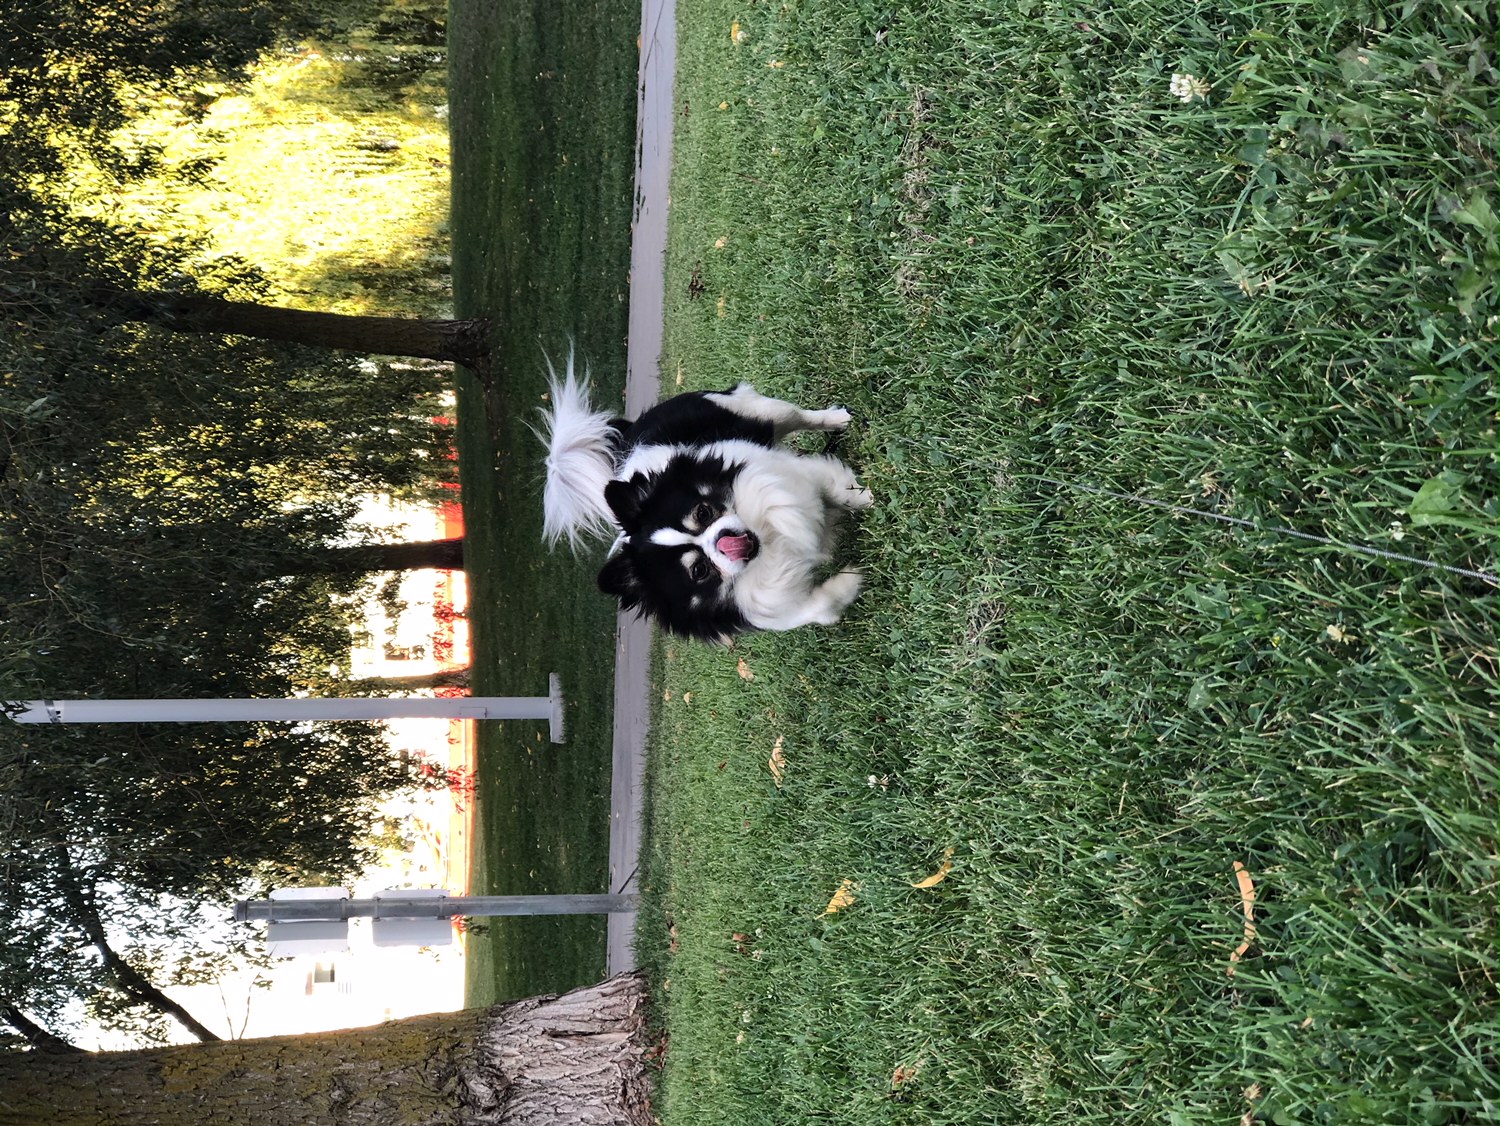 Dog running in the park